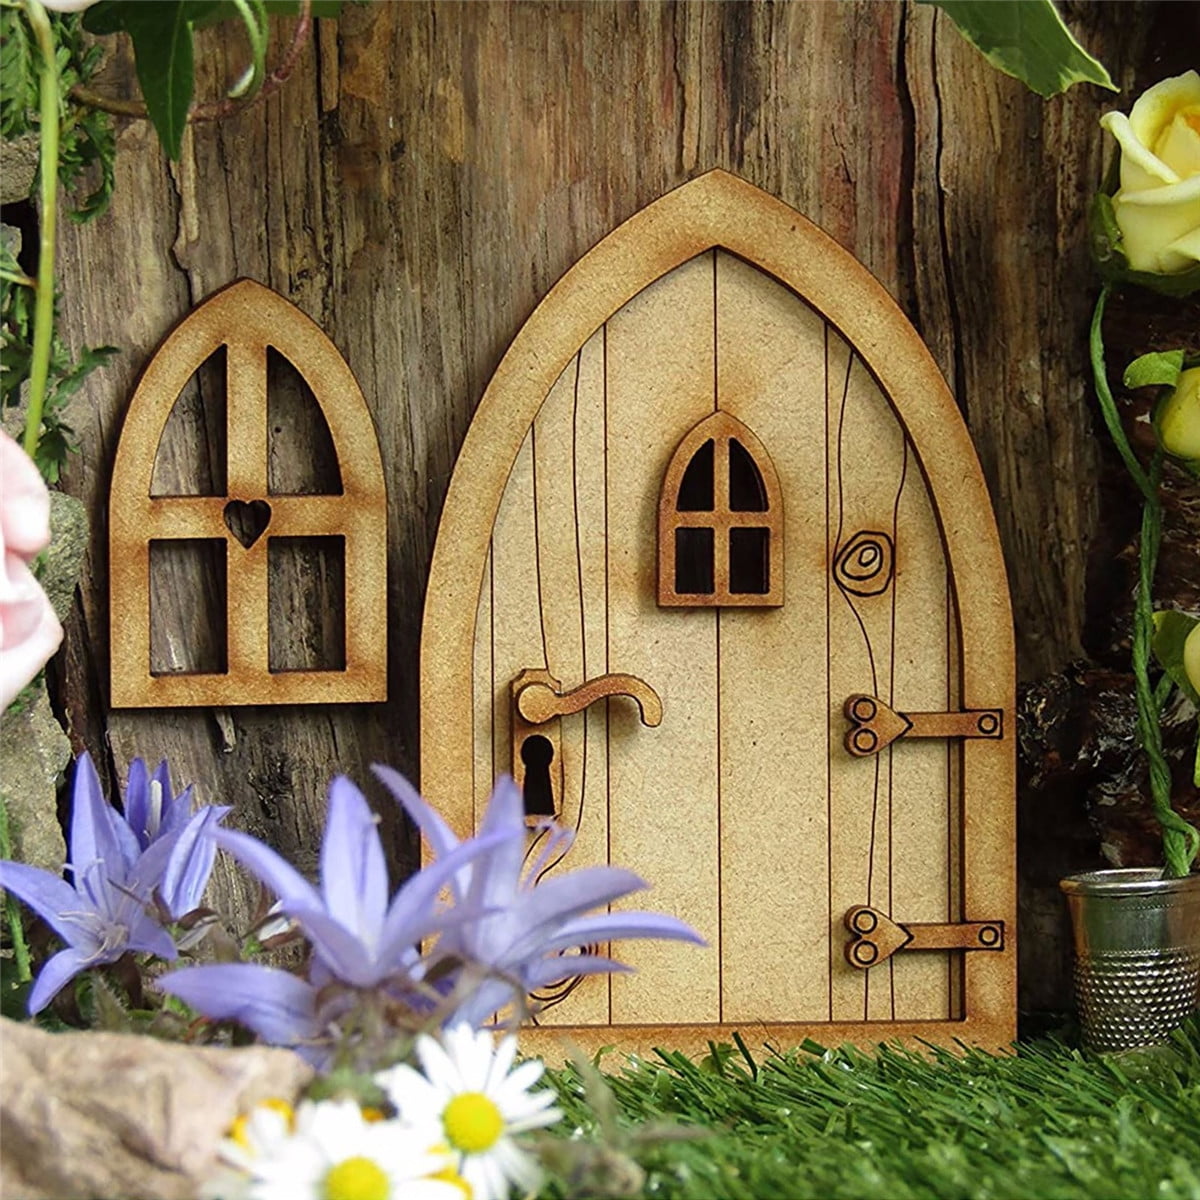 Miniature Fairy Gnome Home Window and Door for Trees Yard Art Garden Sculpture Decoration YUGHGH Wooden Playhouse Decoration Door for Self-Assembly Door Gnome Door Set Garden Decoration Doors